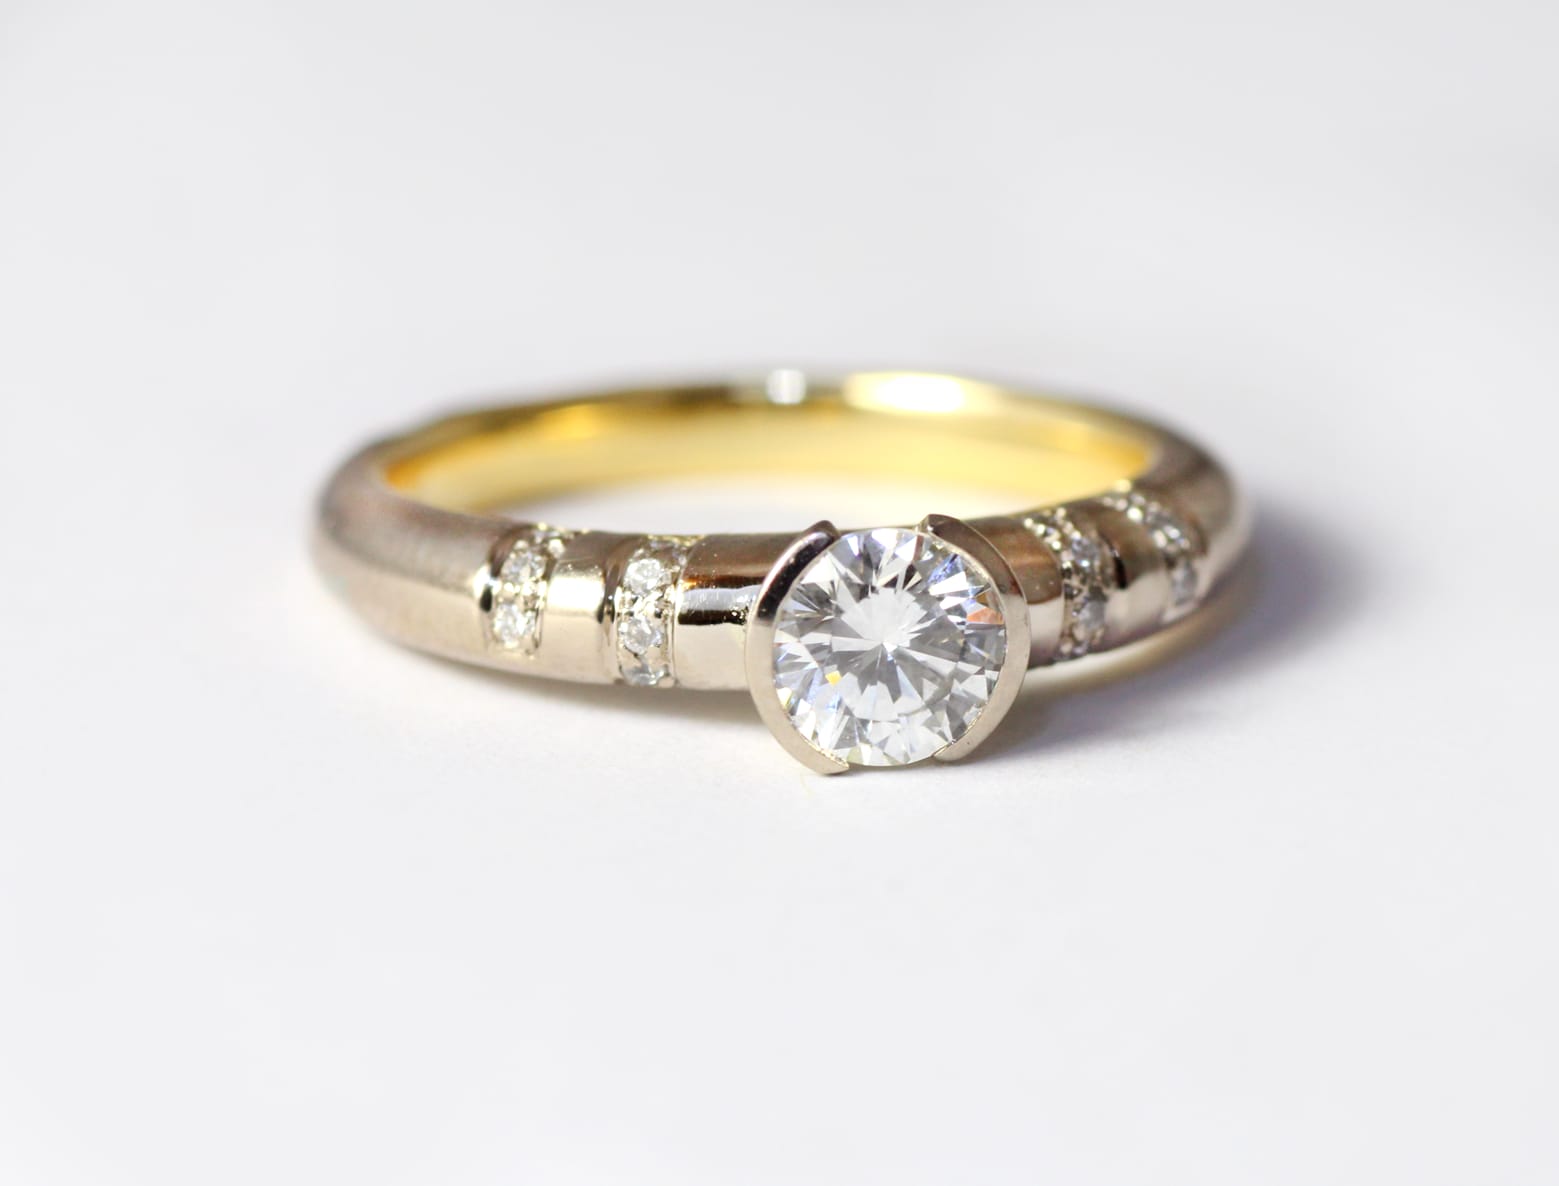 18ct Fairtrade gold with main diamond and small diamonds by Zoe Pook Jewellery